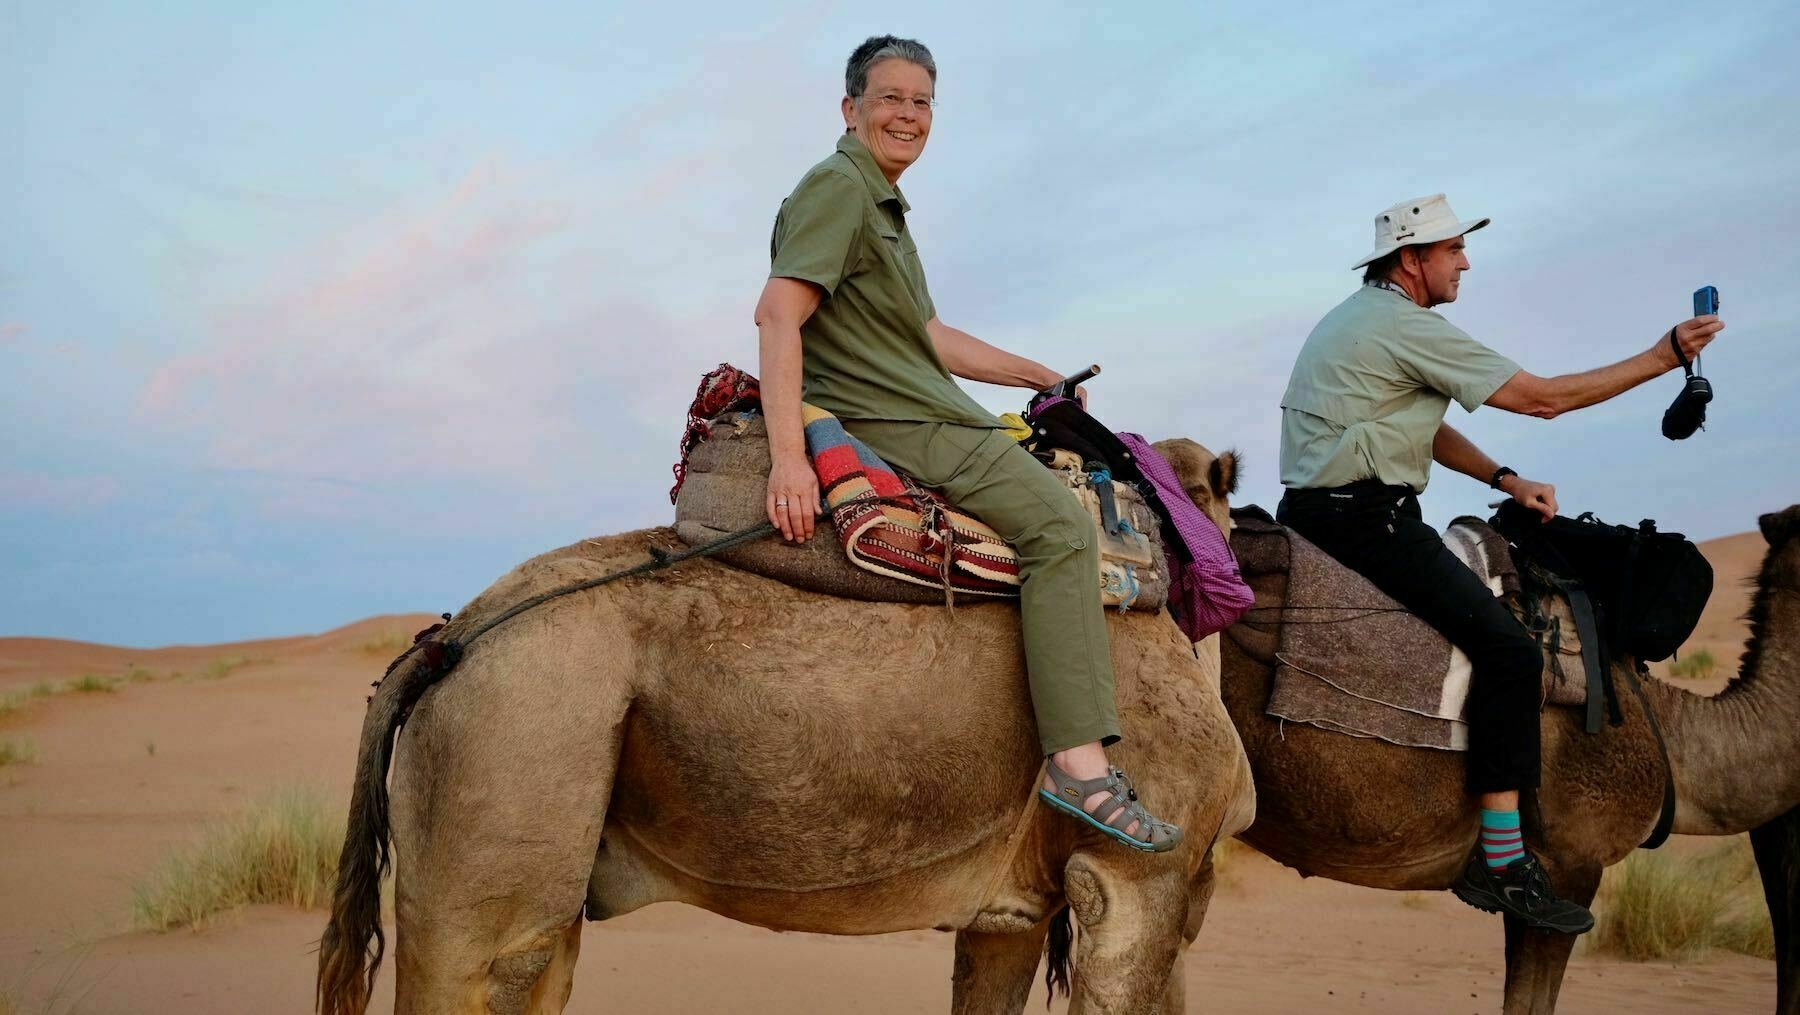 Me on a camel in Morocco. 